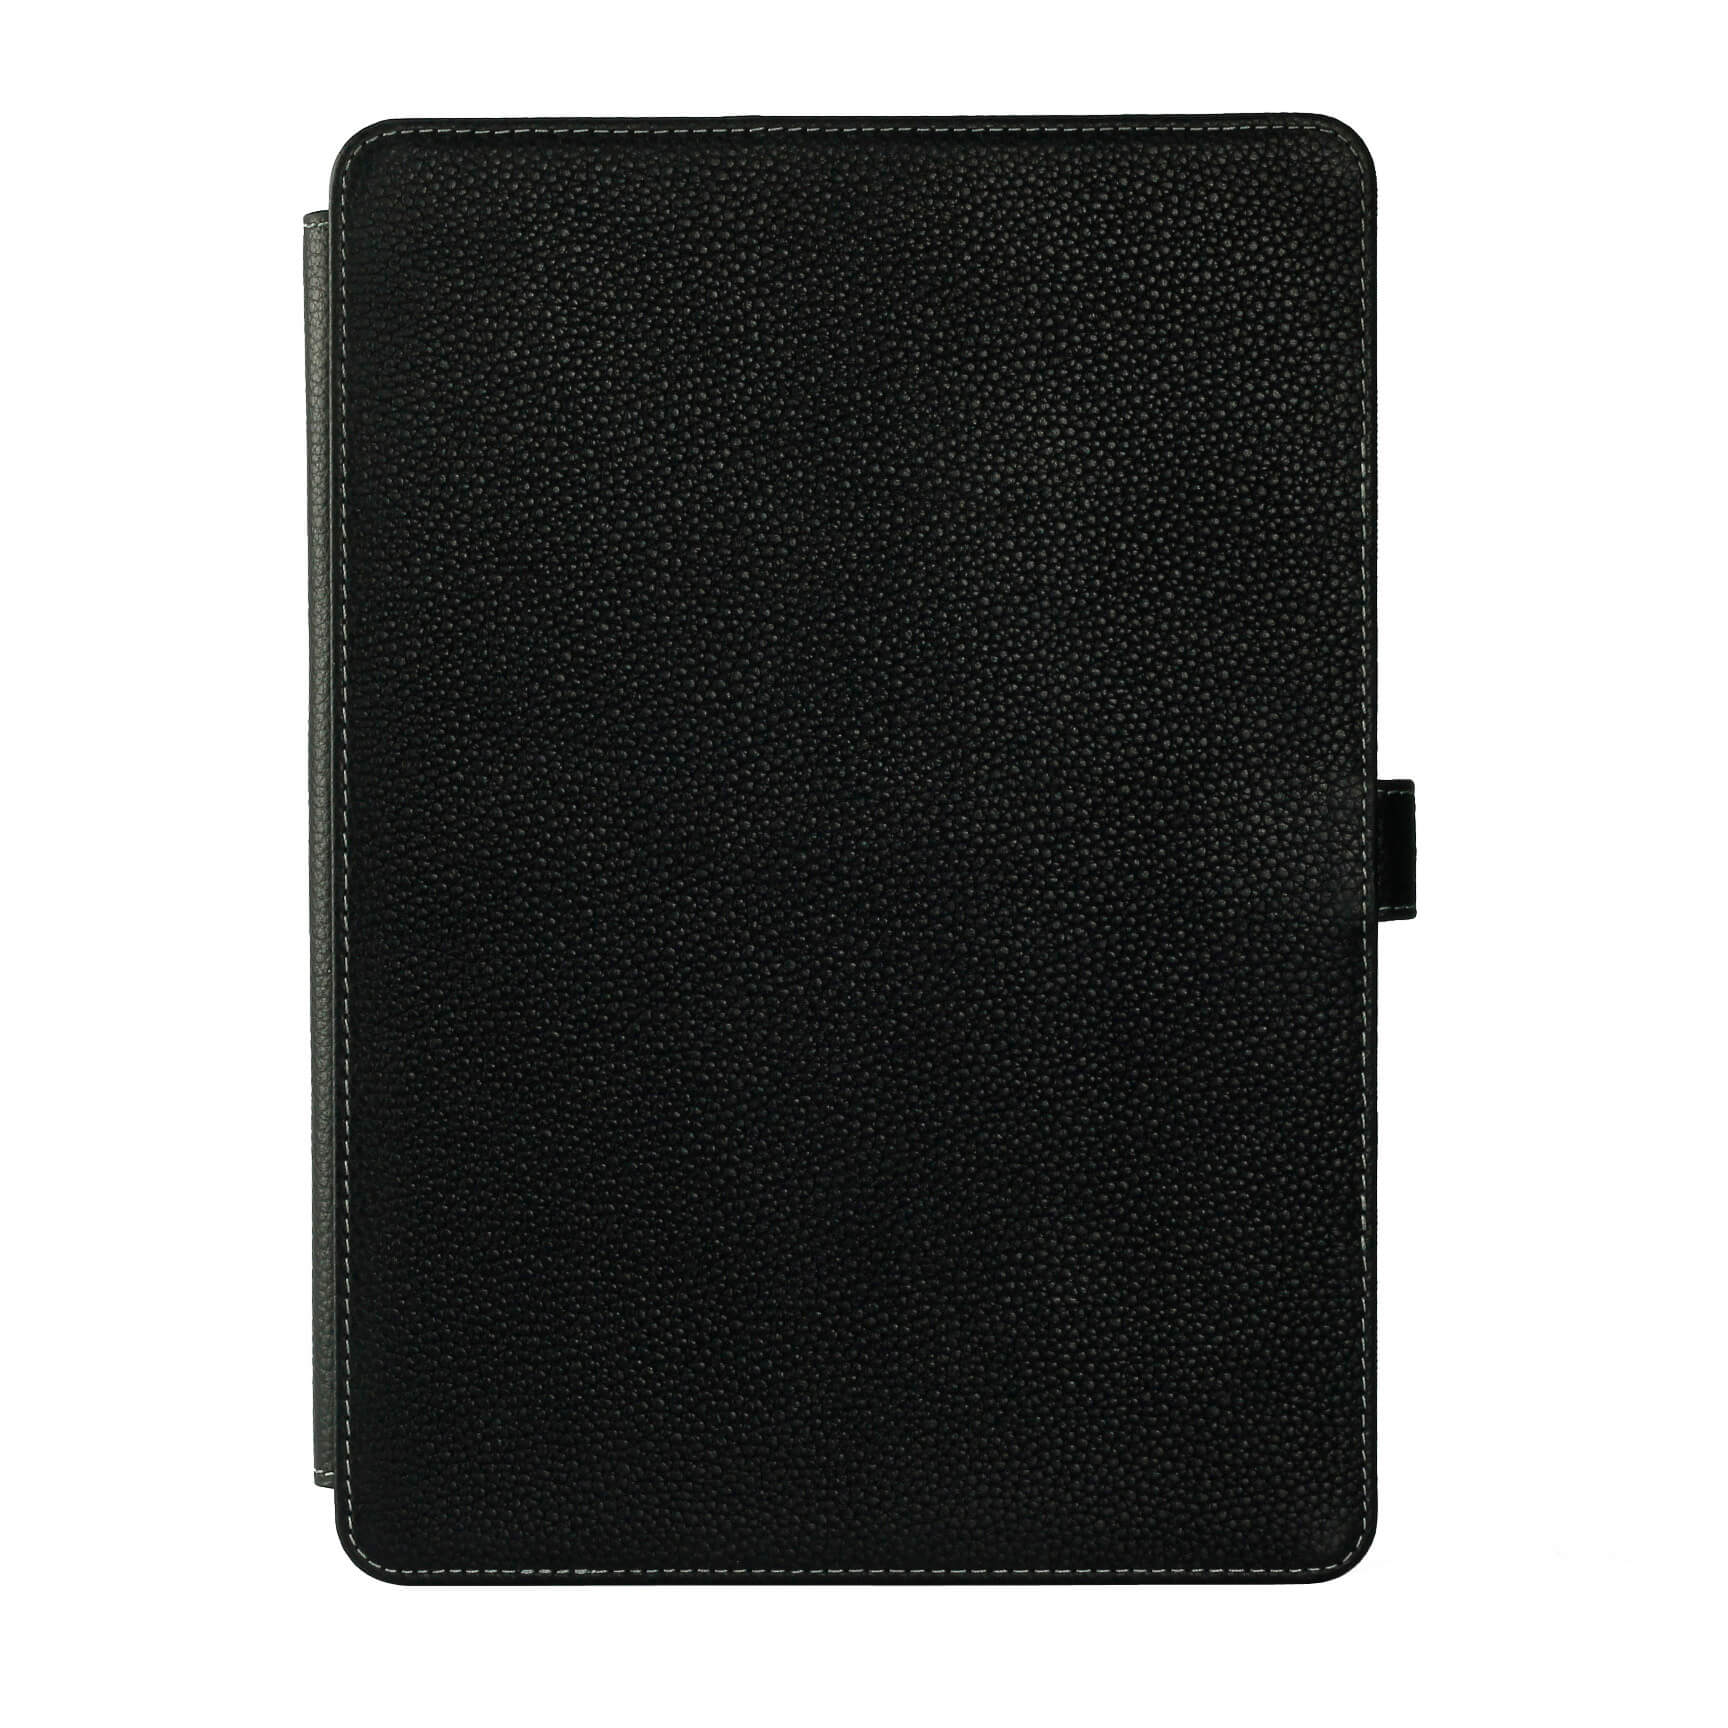 Tablet Cover Leather Black 9.7" iPad Air/Air2/Pro